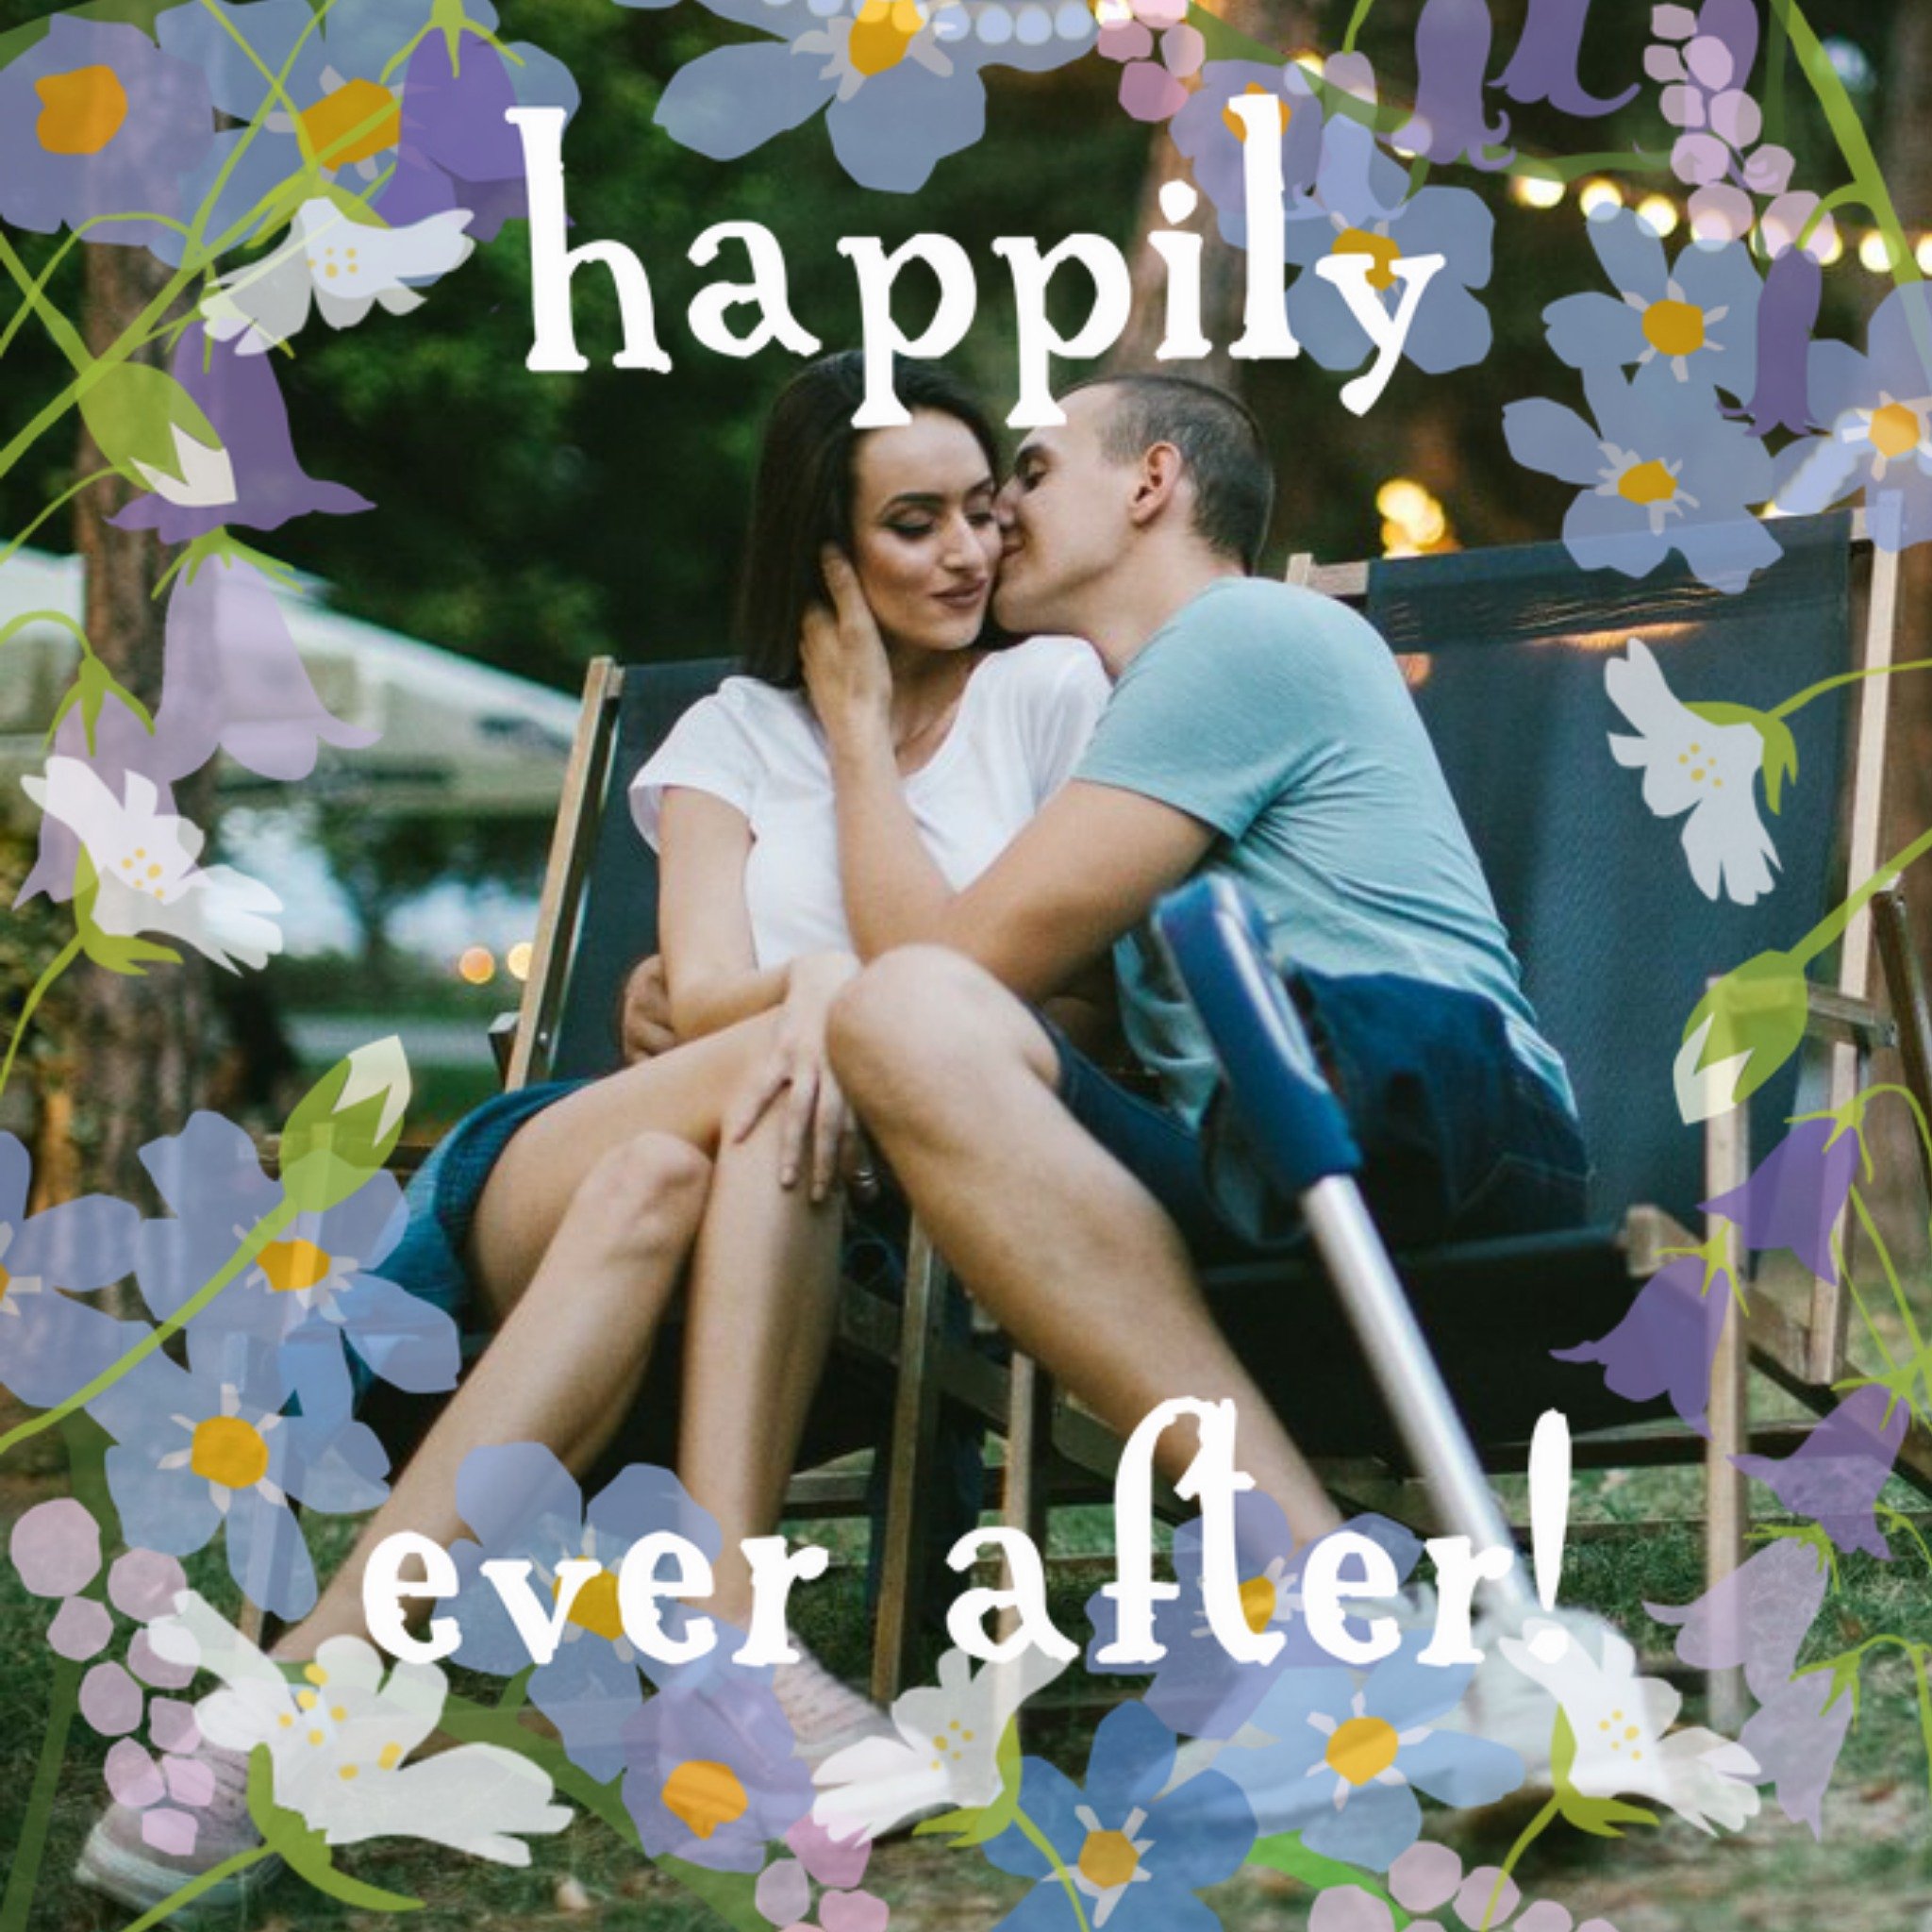 Moonpig Bluebells Happily Ever After Personalised Photo Upload Wedding Day Card, Square